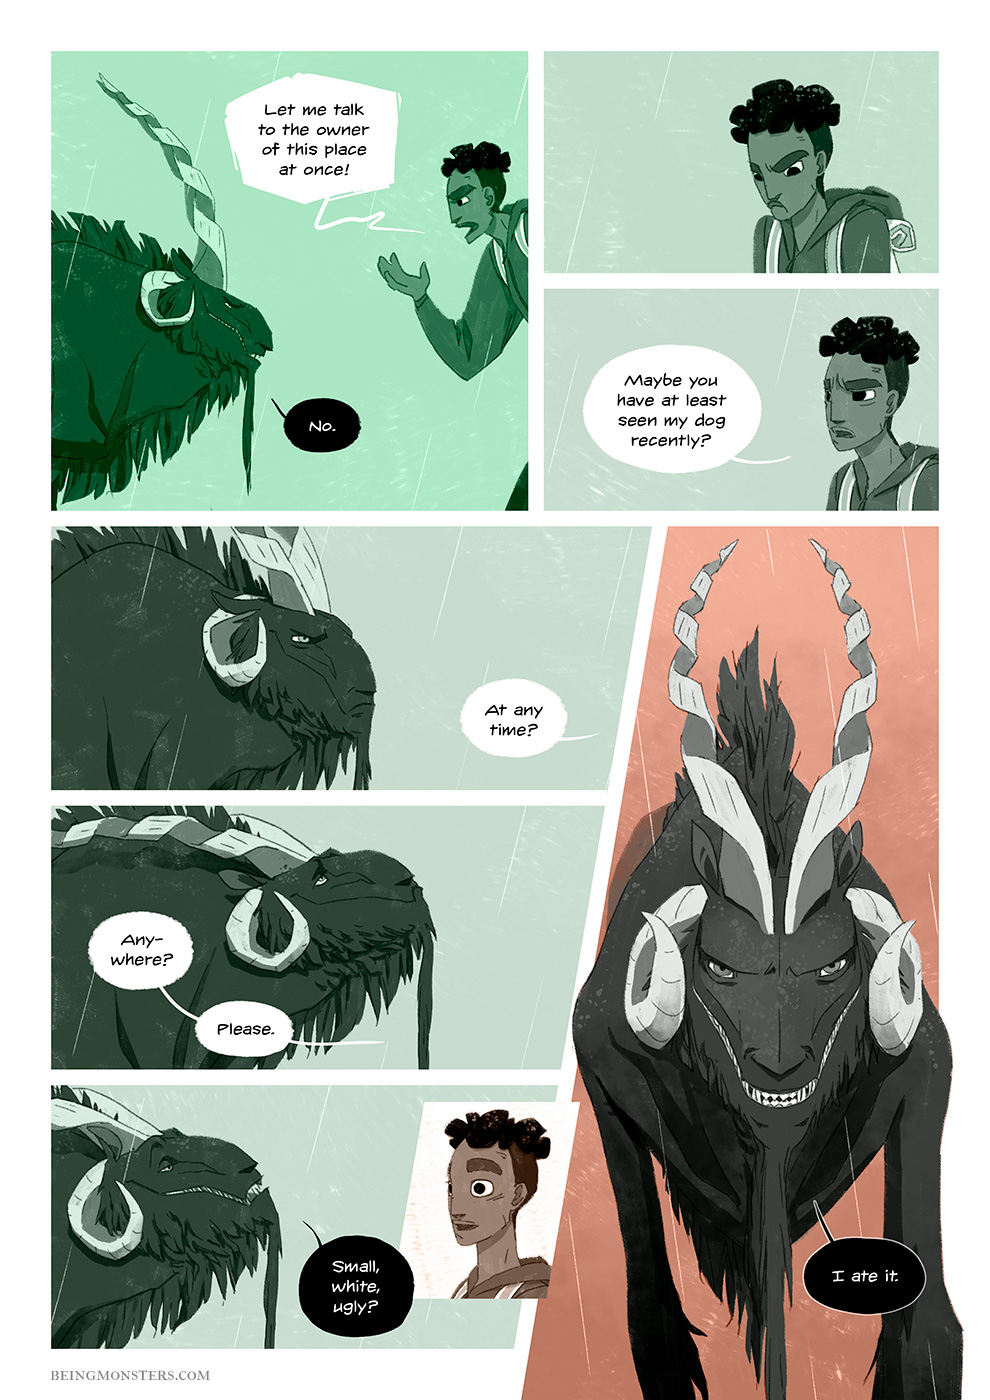 Being Monsters Book 1 Chapter 5 Page 14 EN